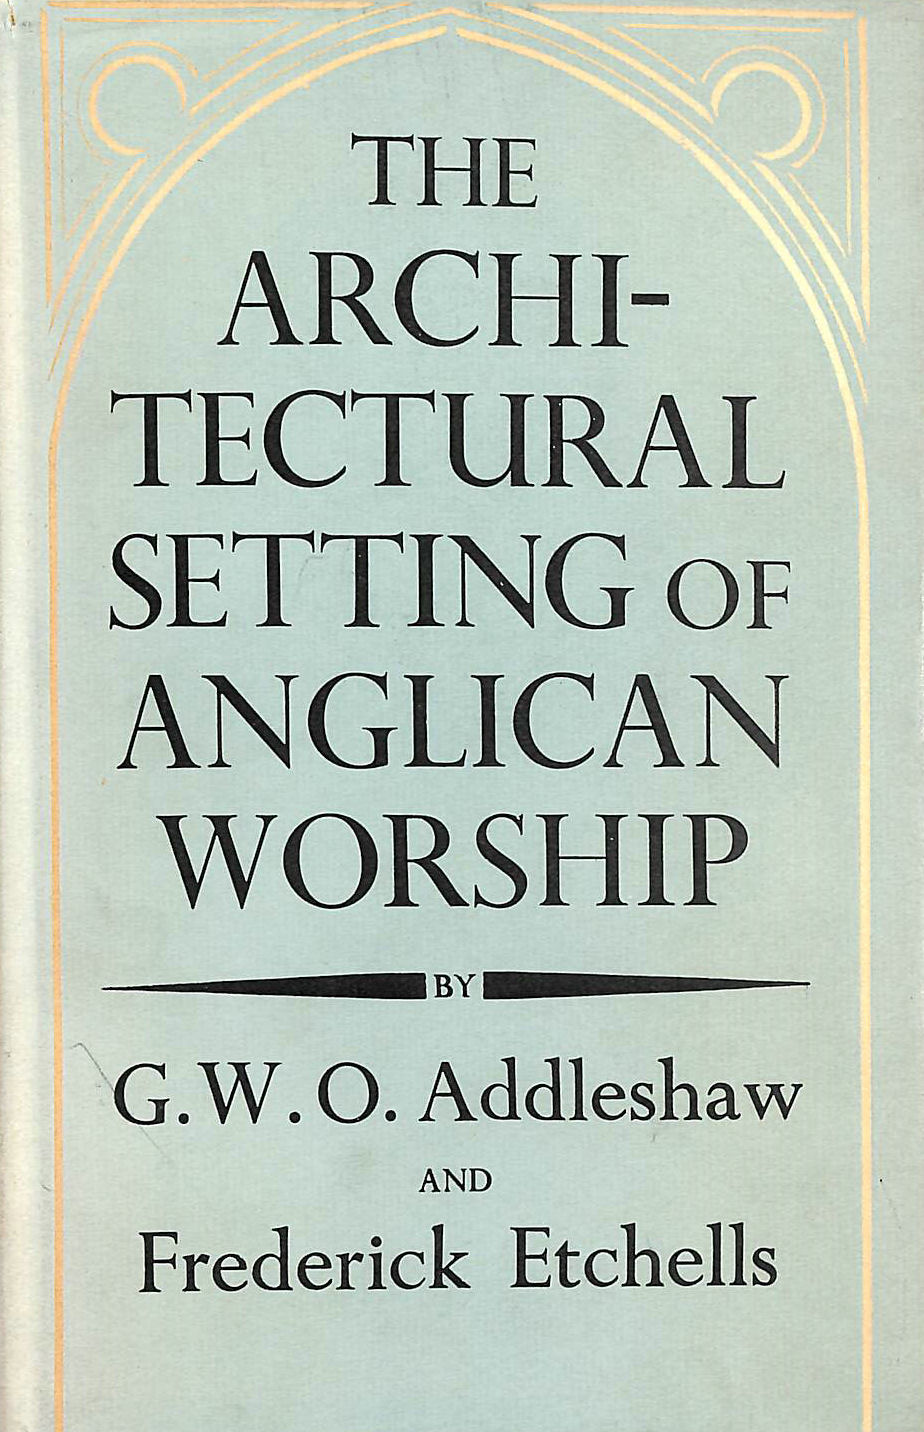 ADDLESHAW, G. W. O. & ETCHELLS, FREDERICK - The Architectural Setting of Anglican Worship: An Inquiry into the Arrangements for public worship in the Church of England from the Reformation to the present day.